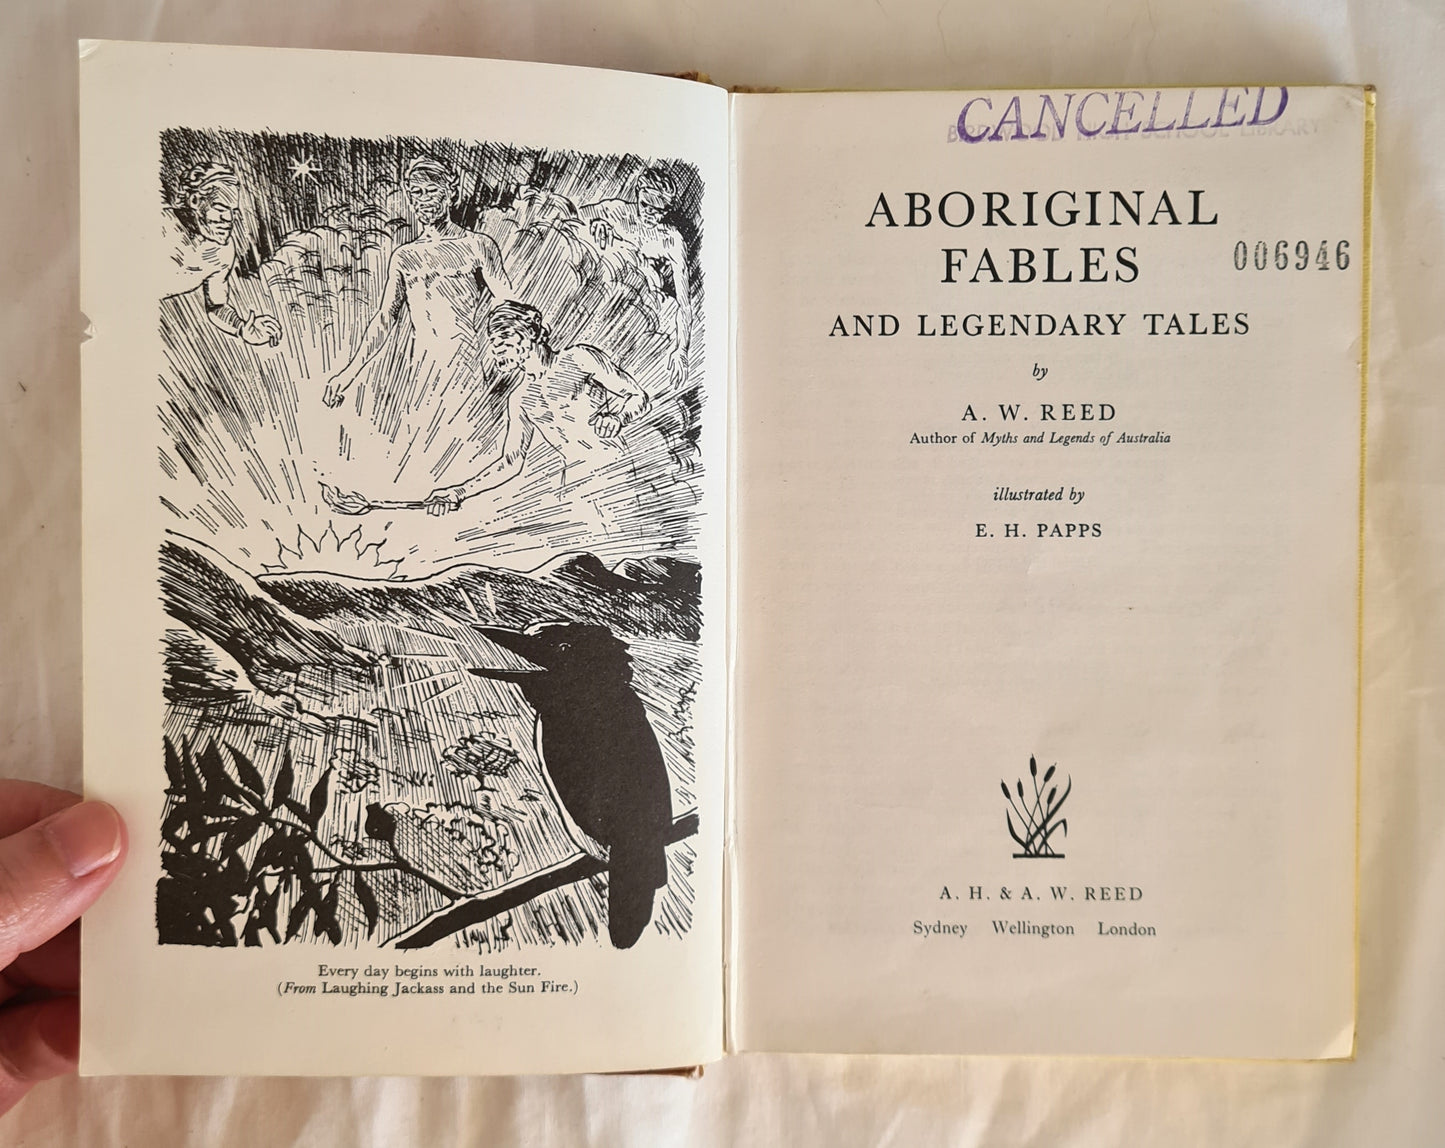 Aboriginal Fables And Legendary Tales by A. W. Reed